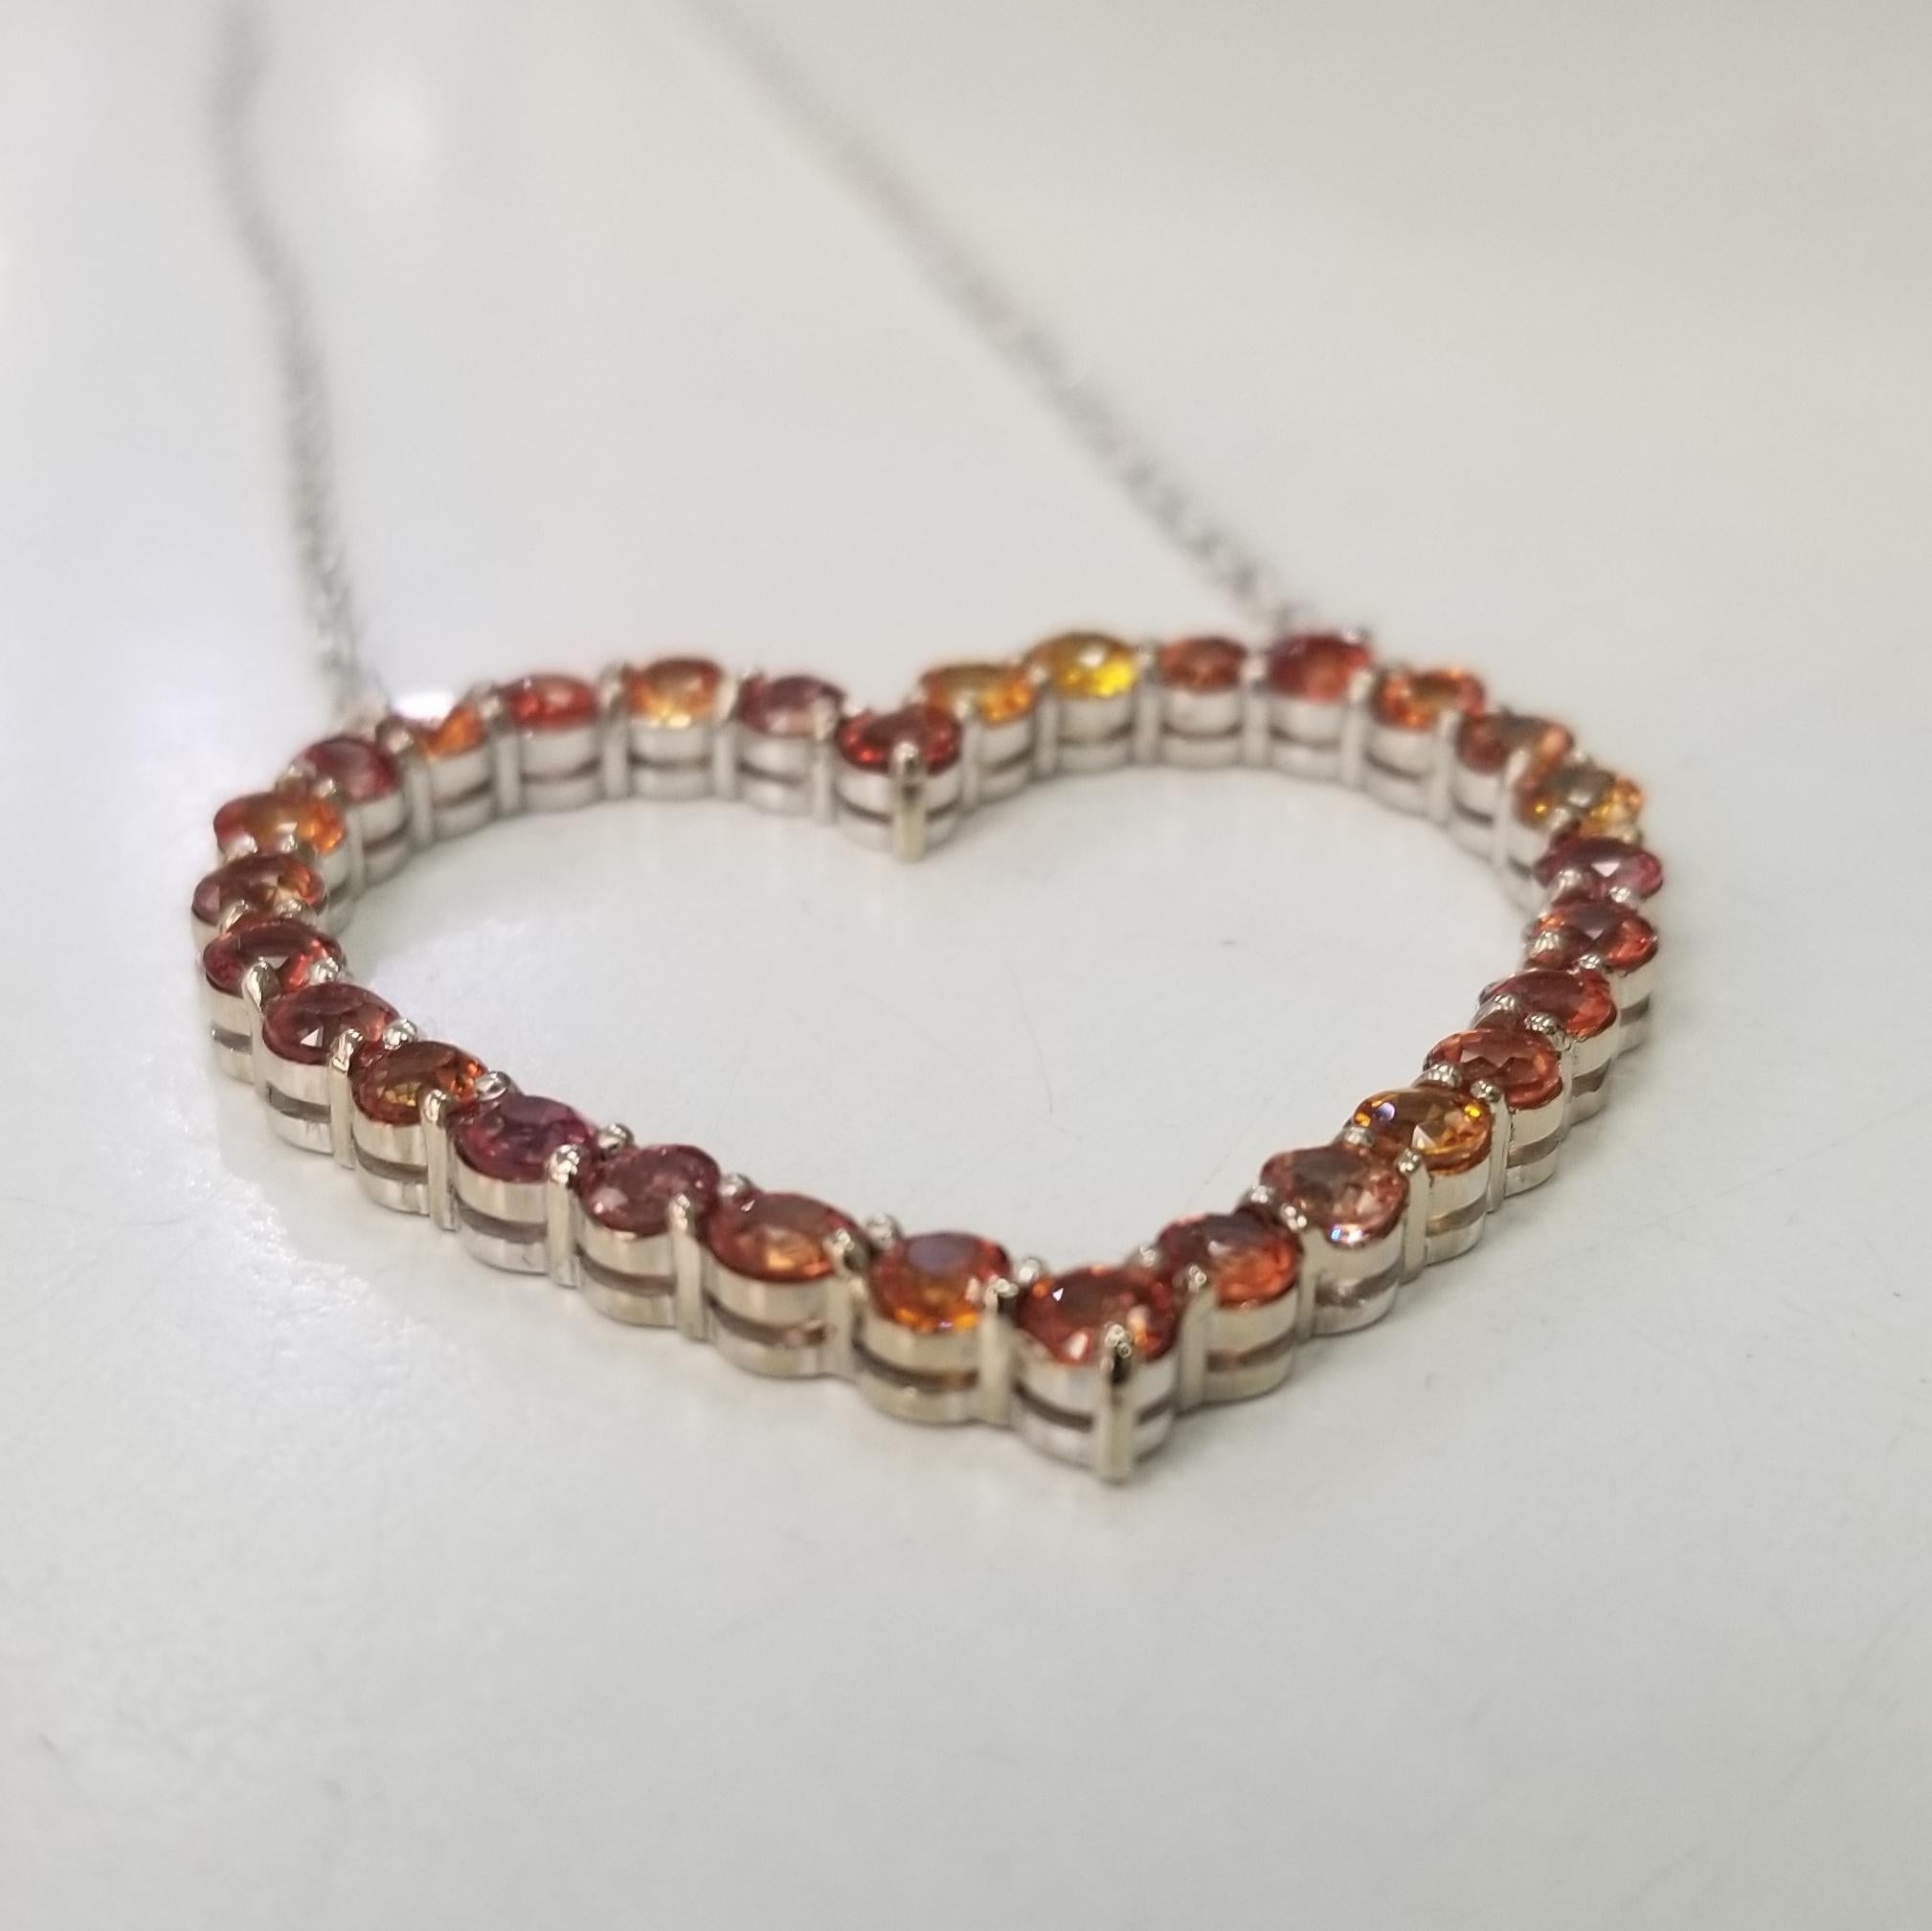 Specifications:
    PENDANT LENGTH: 1 1/2 inches
    PENDANT WIDTH: 1 1/2 inches
    CHAIN length:18 inch
    CHAIN & PENDANT weight: 12.12 gram
    STONES:  30  Sapphires yellow or orange
    TOTAL CARAT WEIGHT:   8.01cts.
    metal:14k WHITE GOLD
